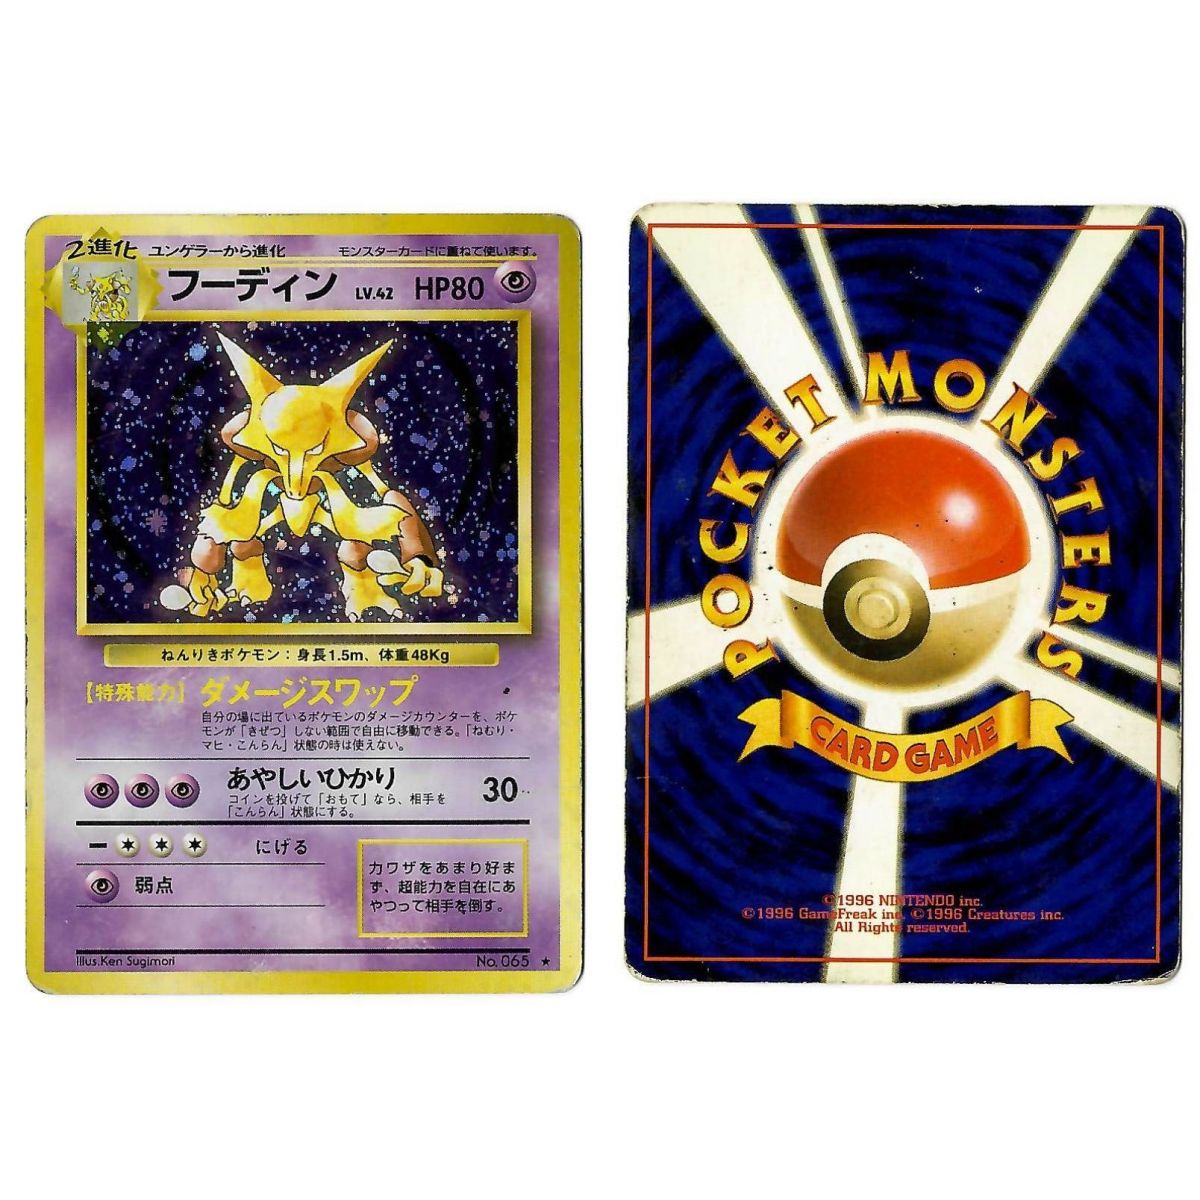 Alakazam (2) No.066 Expansion Pack BS Holo Unlimited Japanese View Scan